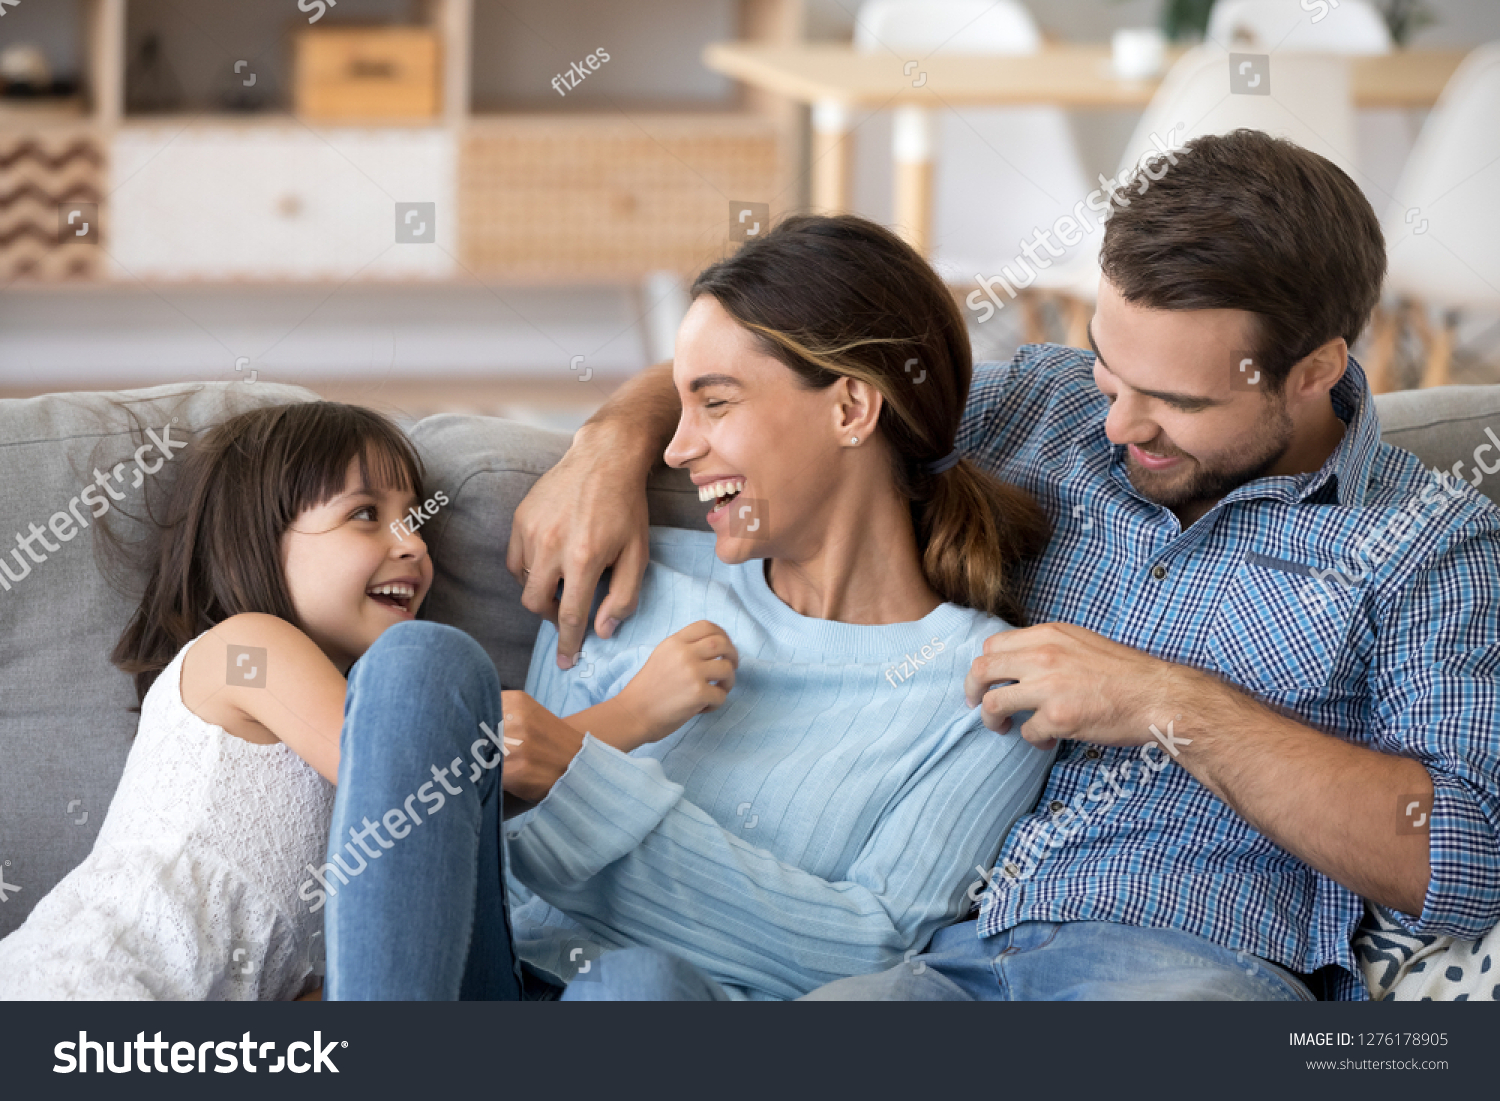 Cute kid daughter and dad tickling mom having fun good time playing together at home, happy parents and little child girl enjoying funny activity and communication, family laughing relaxing on sofa #1276178905